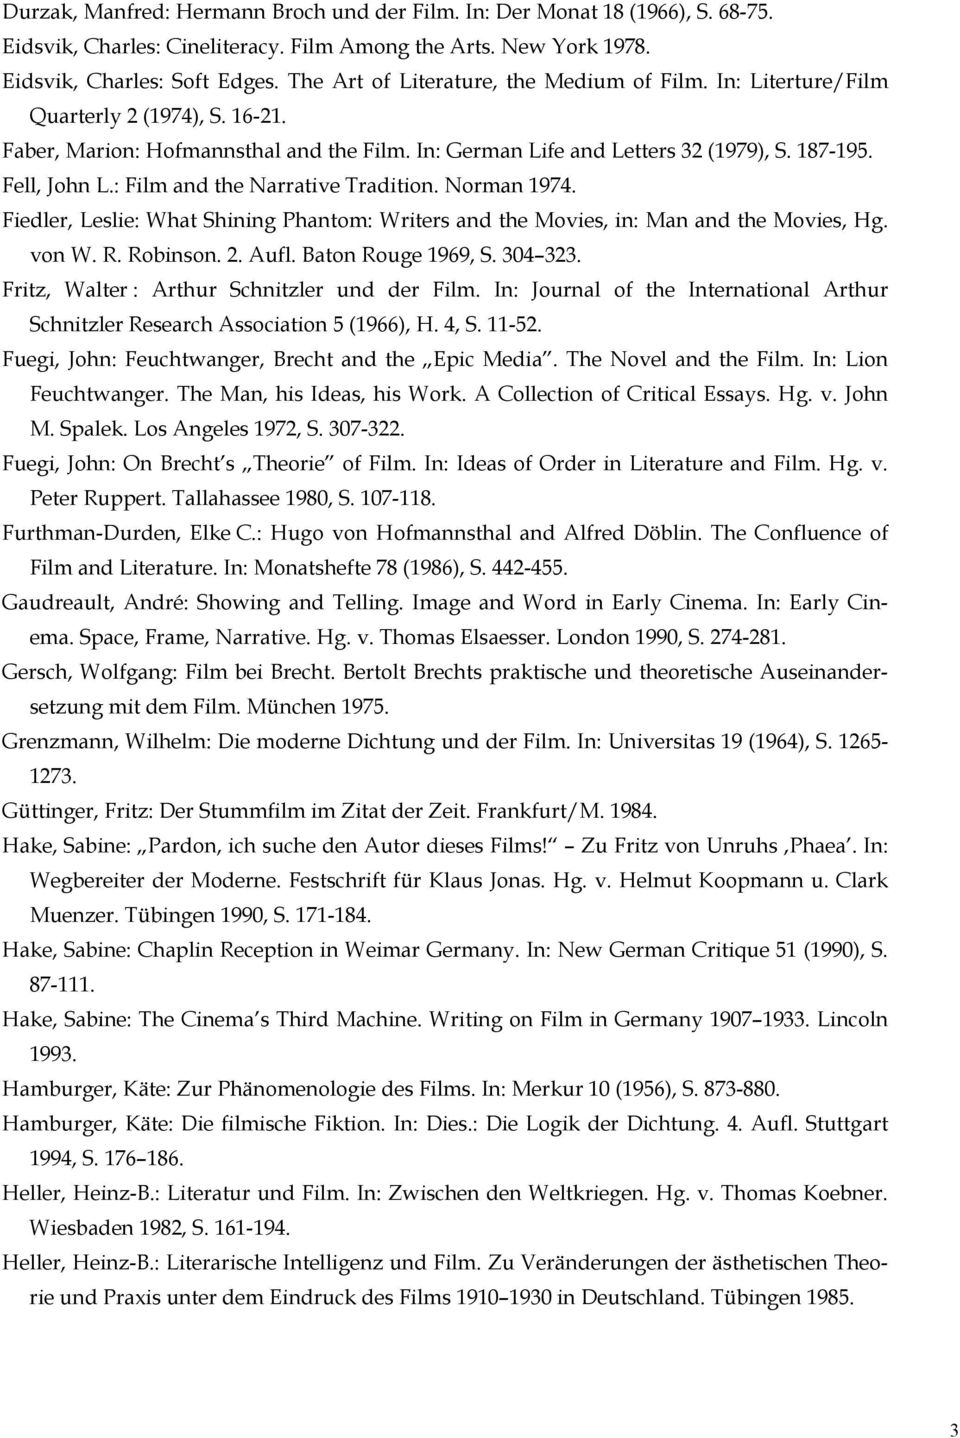 : Film and the Narrative Tradition. Norman 1974. Fiedler, Leslie: What Shining Phantom: Writers and the Movies, in: Man and the Movies, Hg. von W. R. Robinson. 2. Aufl. Baton Rouge 1969, S. 304 323.